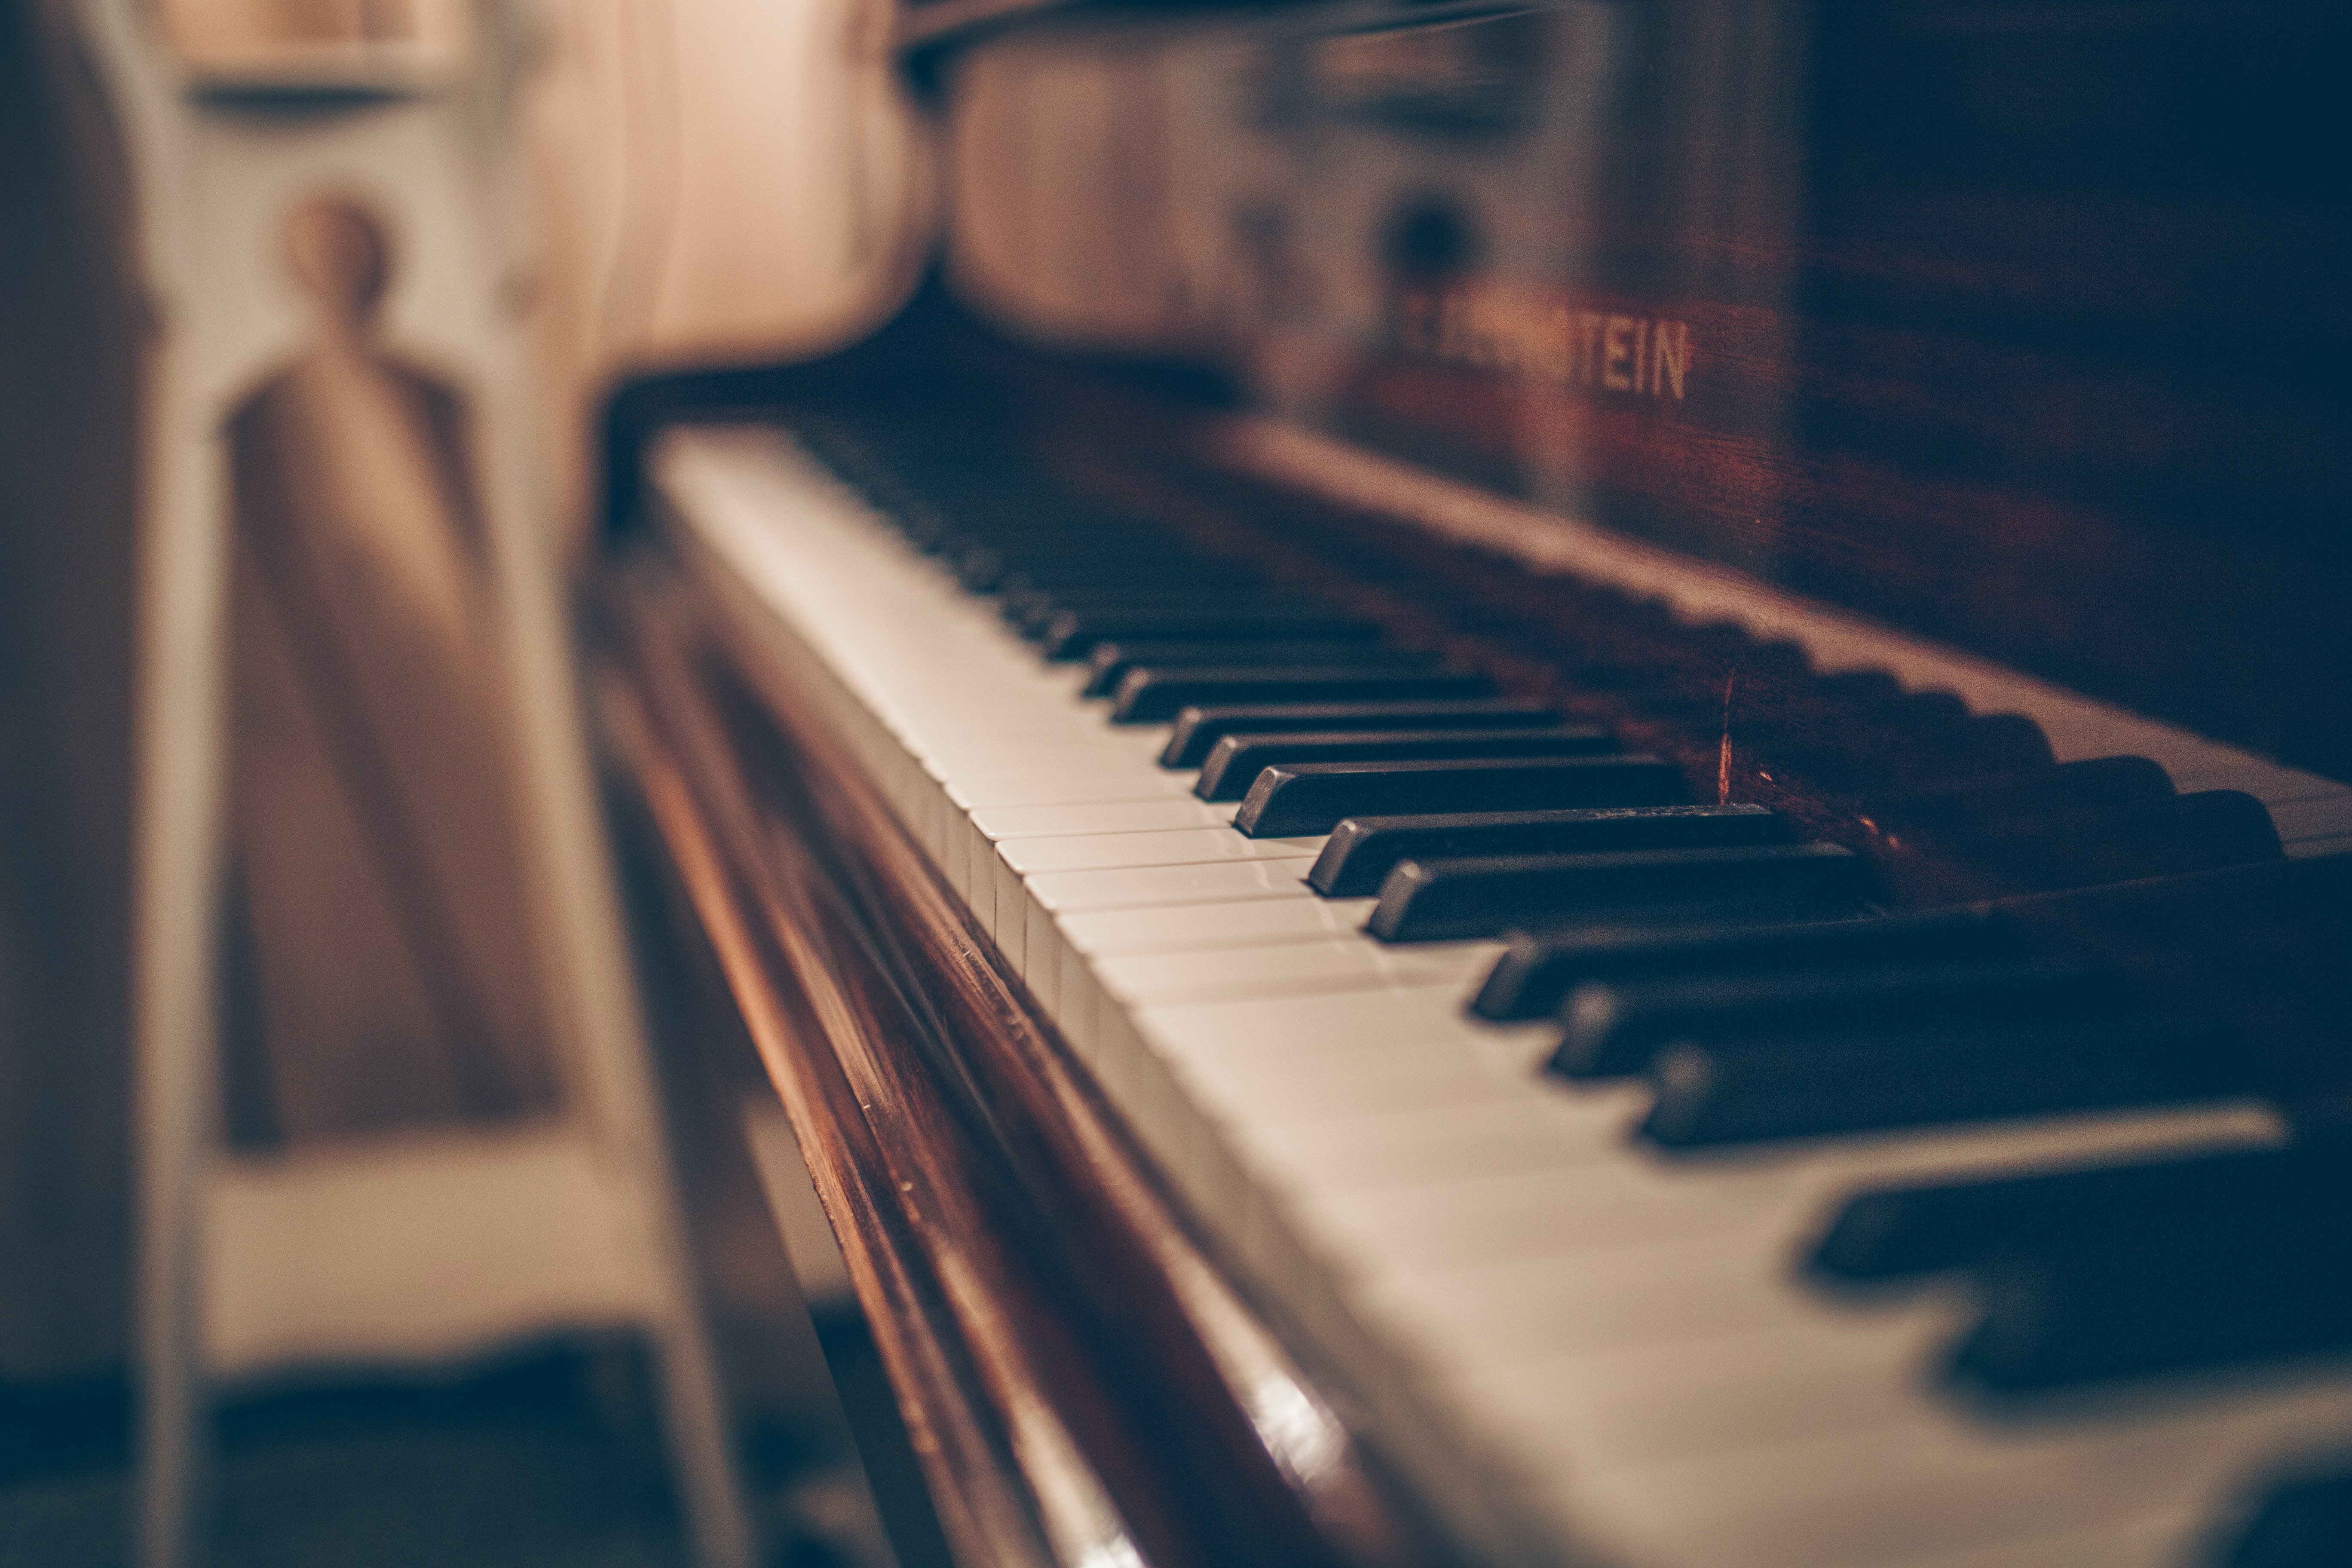 An old piano. | Source: Unsplash